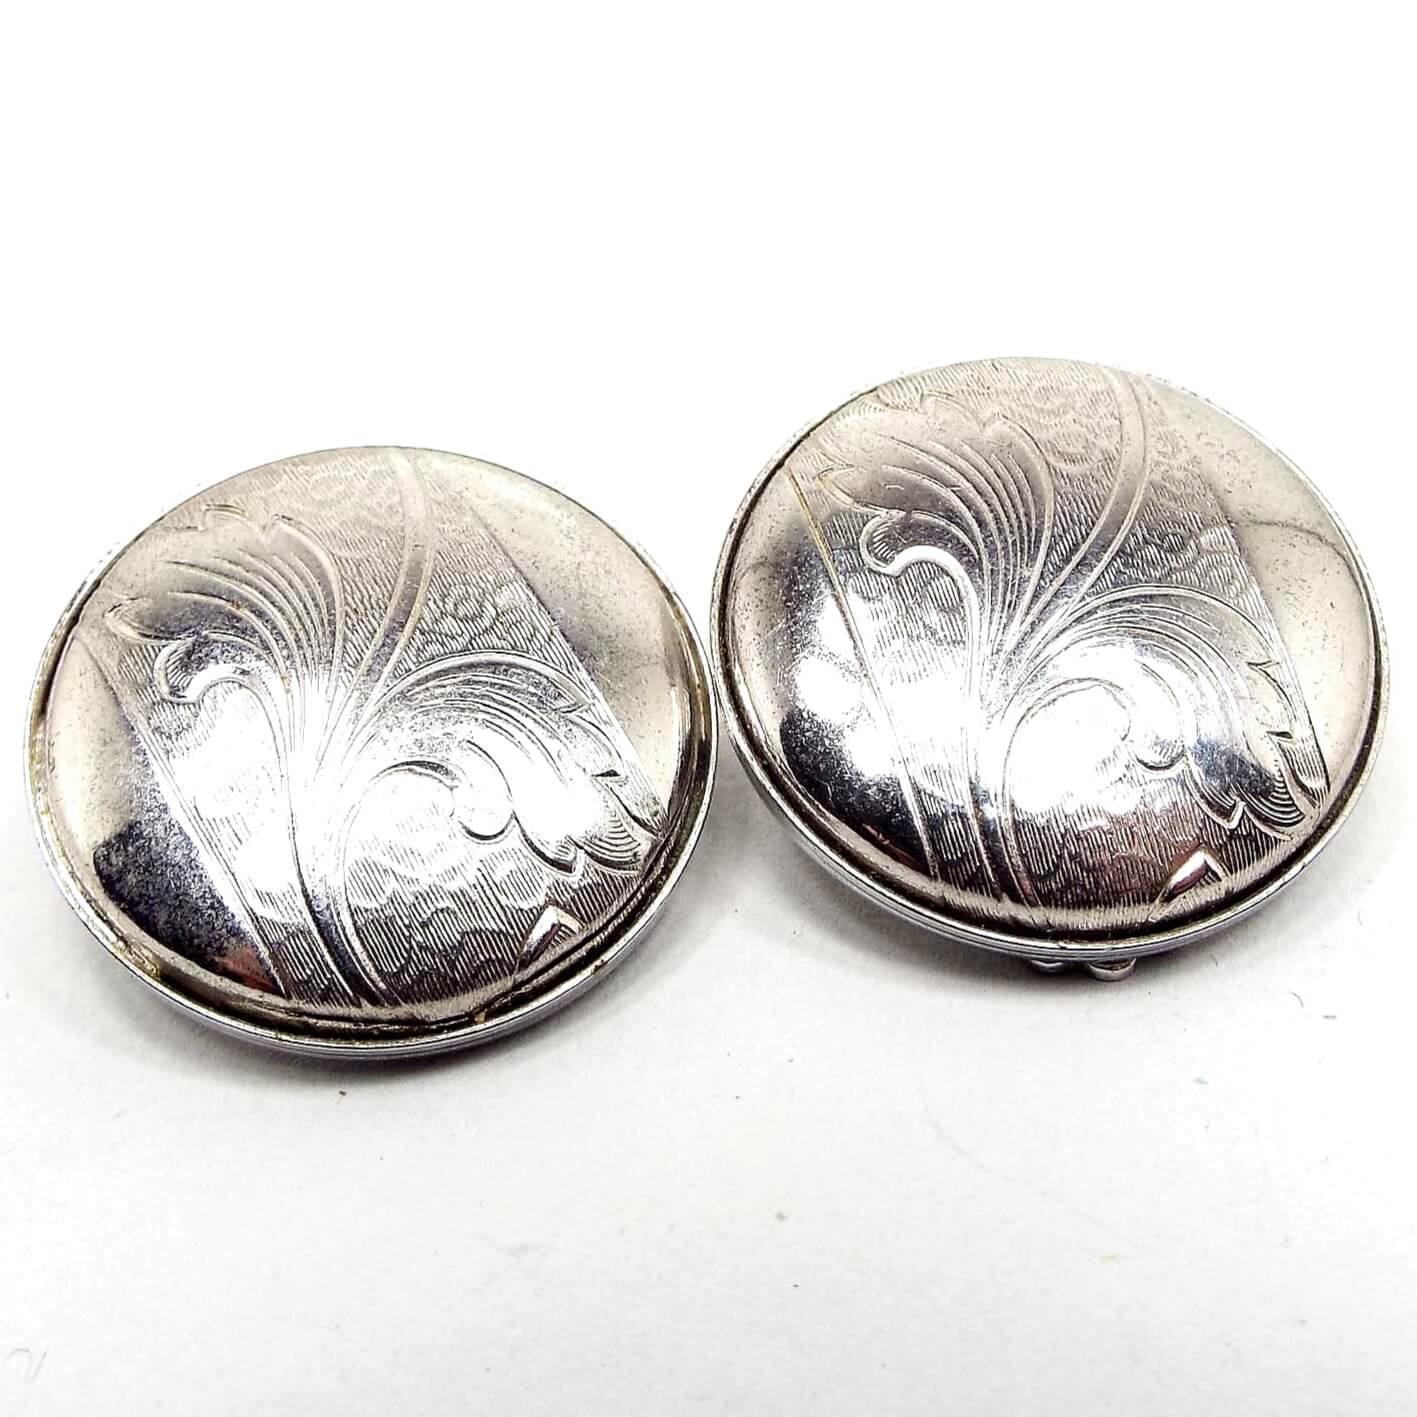 Front view of the Mid Century vintage clip on earrings. They are round and silver tone in color. There is a stamped area across the middle that has a leaf like textured design on it.